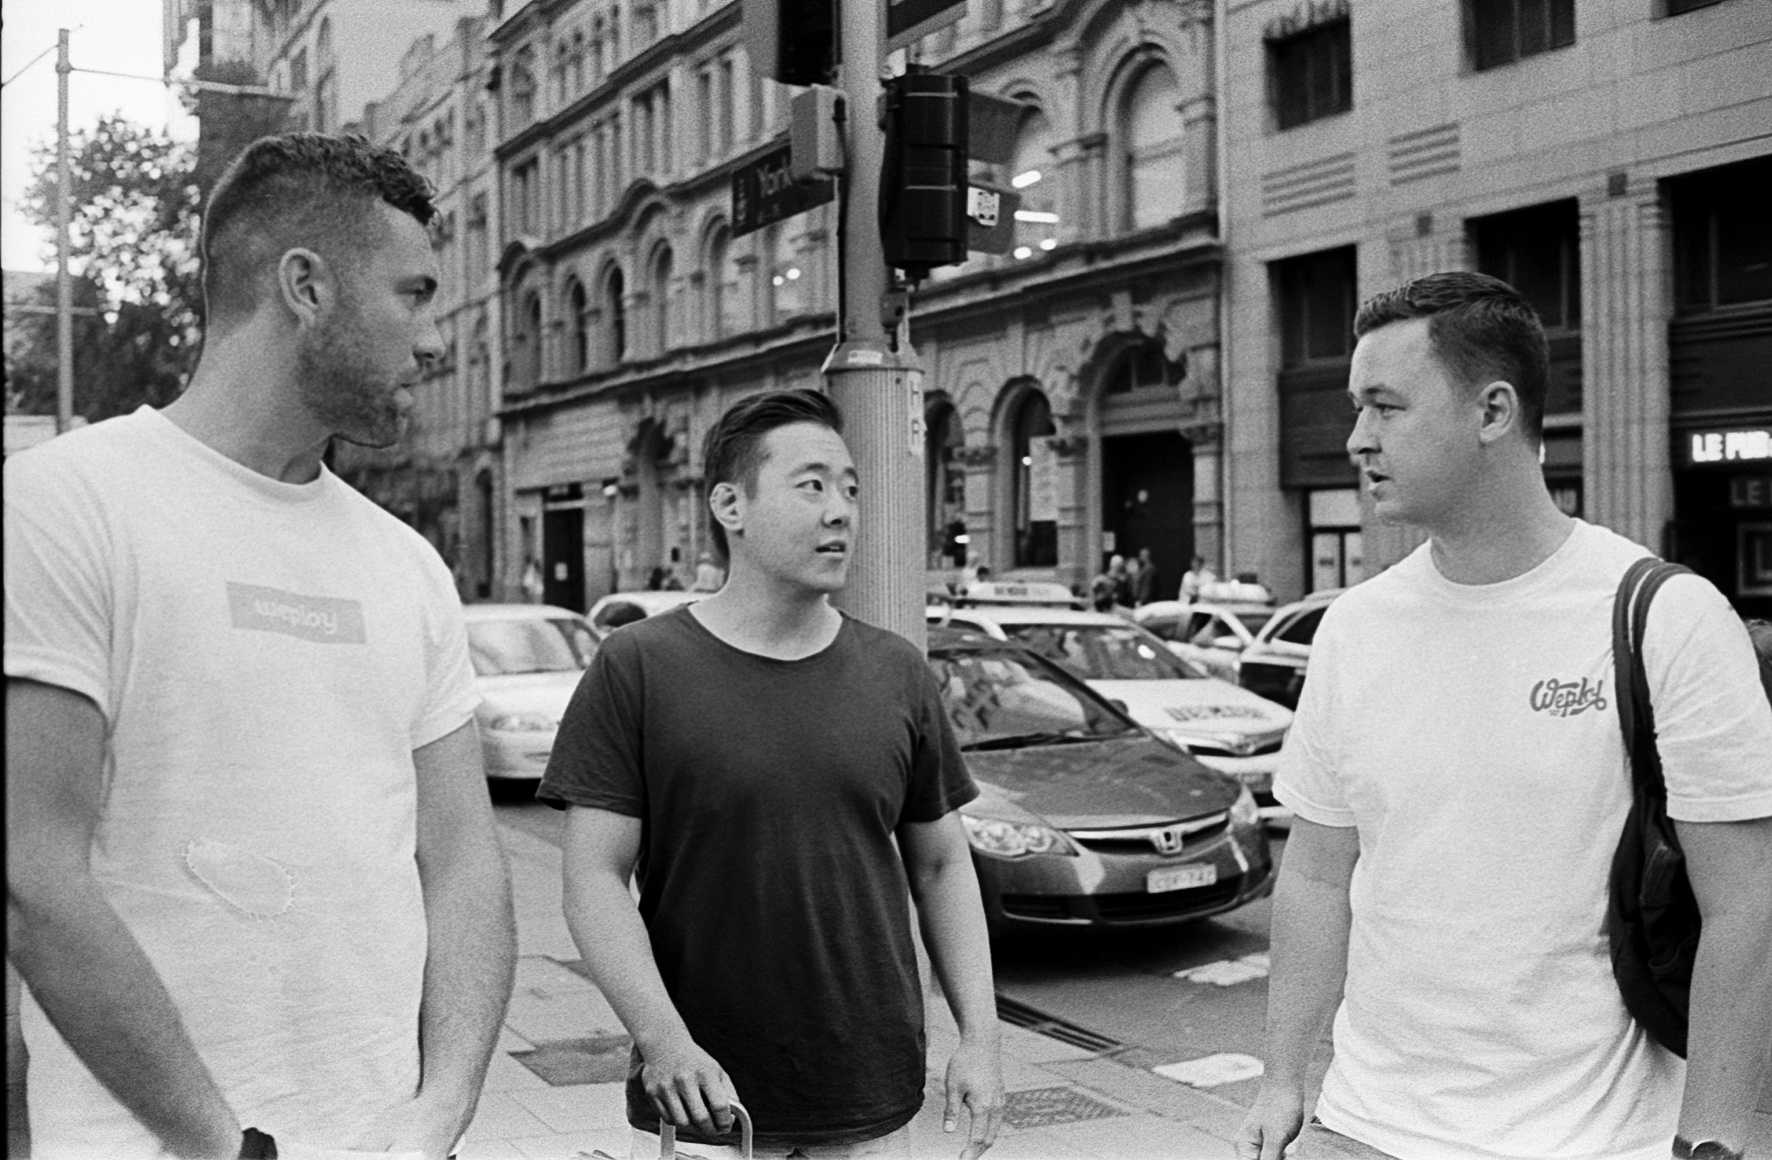 A candid film shot of our Weploy team: Tony Wu, Elliott Young and Julian Hopper in the busy streets of Sydney